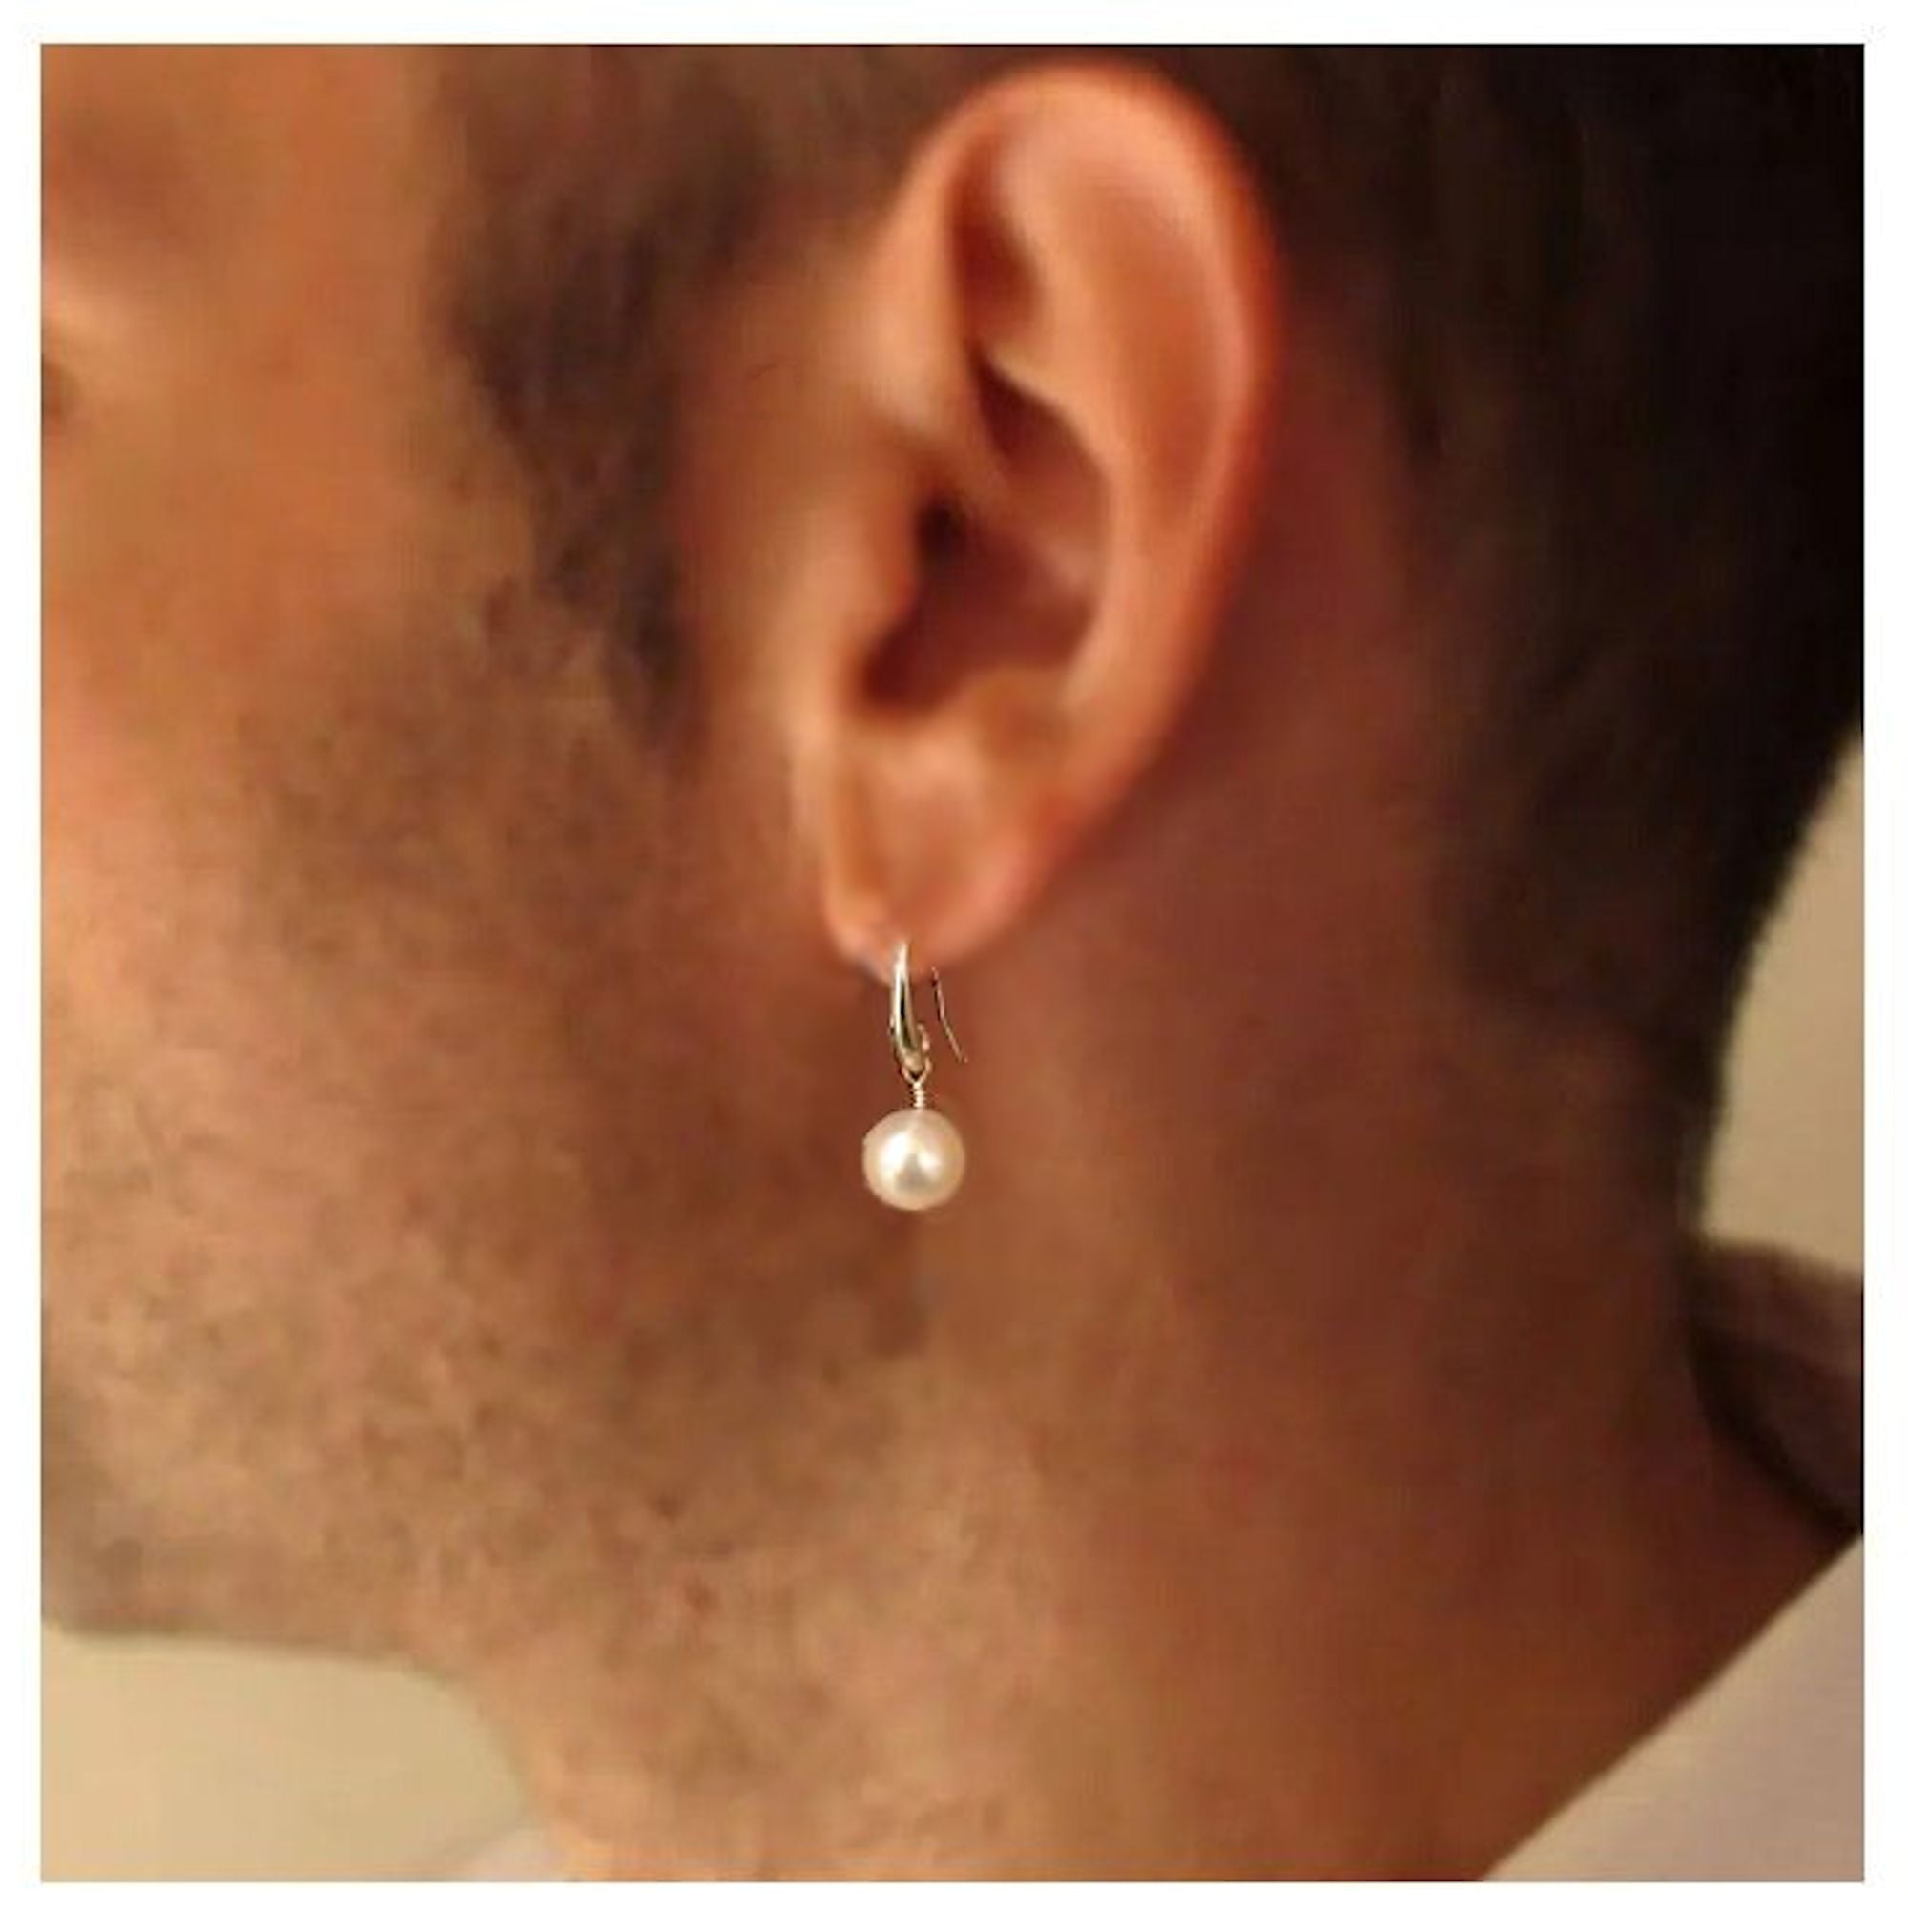 What do girls think about men wearing large hoop earrings? - Quora